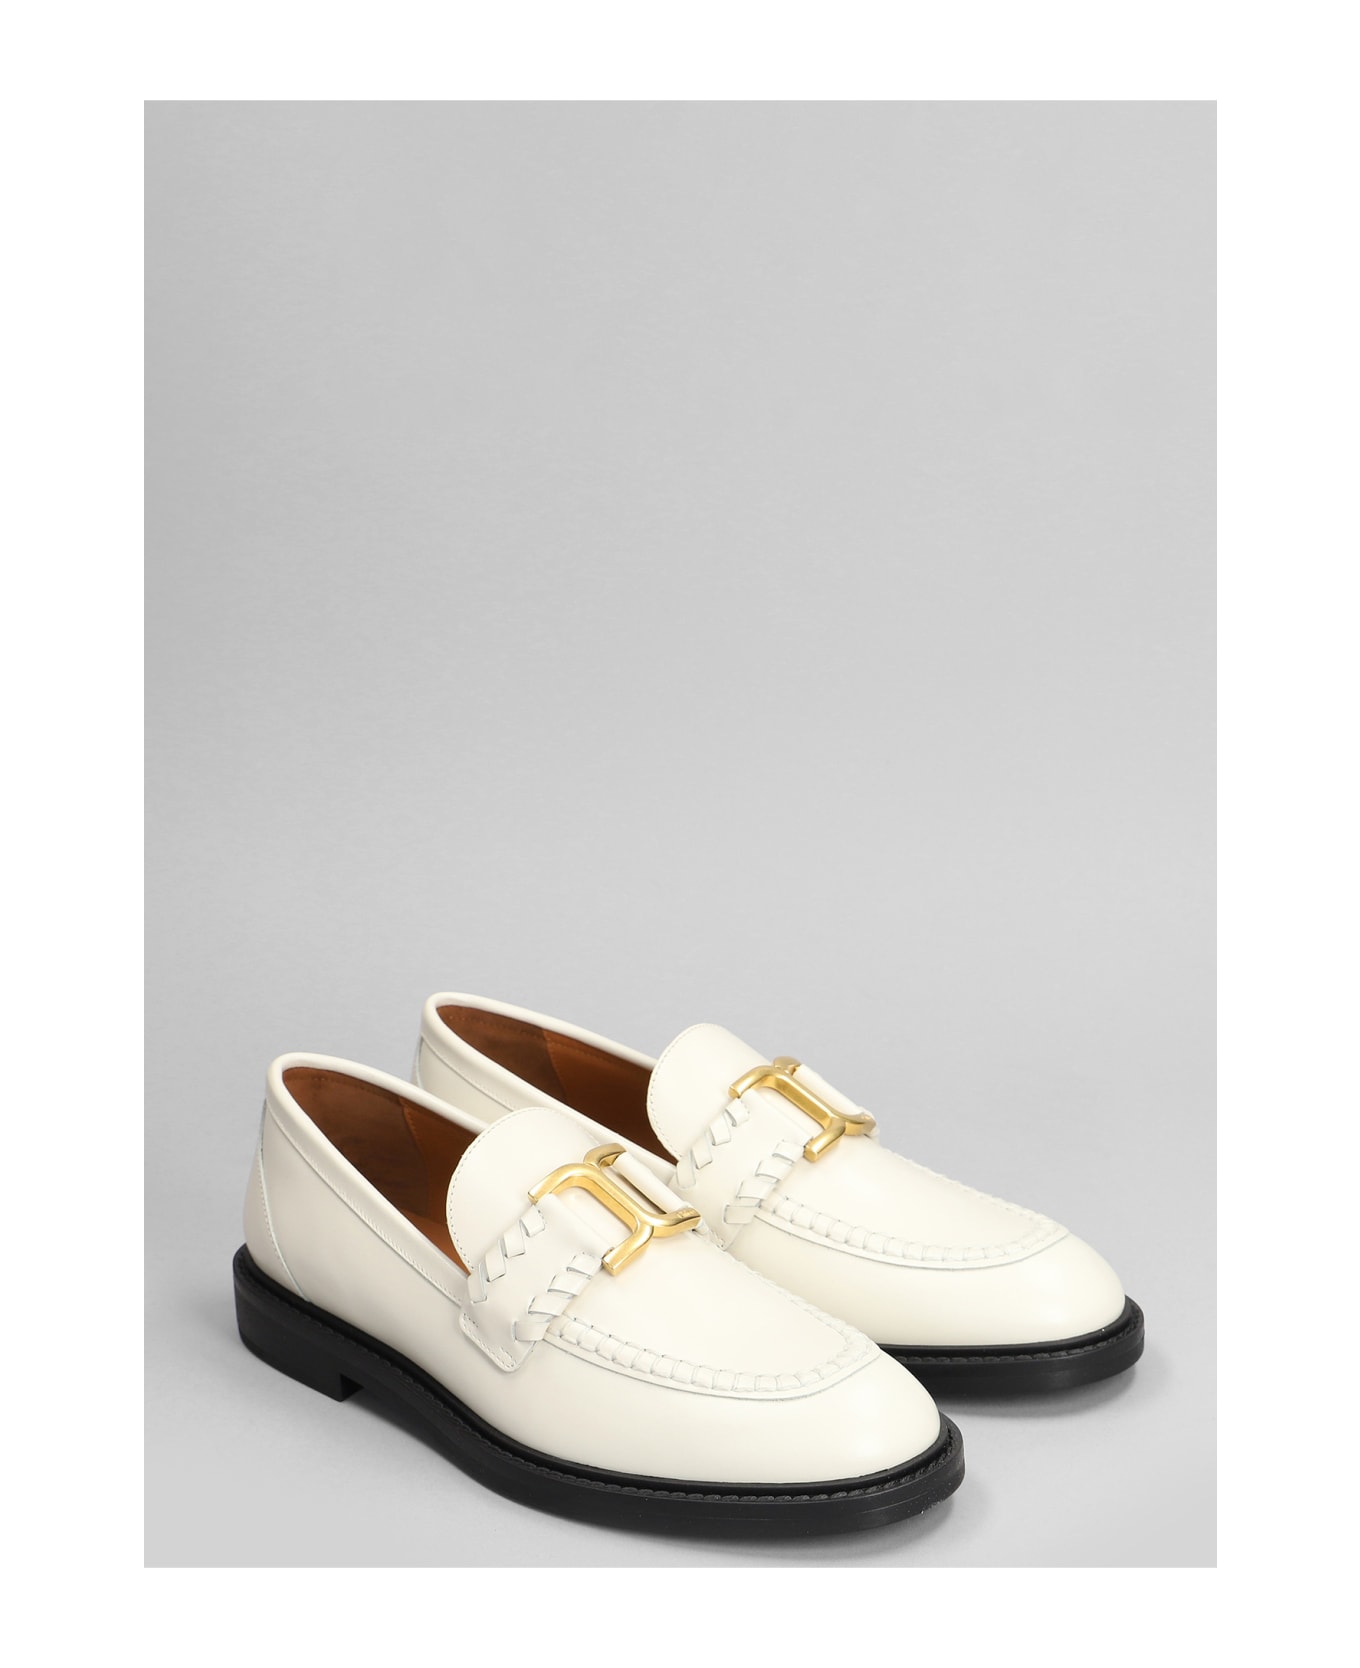 Chloé Mercie Loafers In White Leather - white フラットシューズ